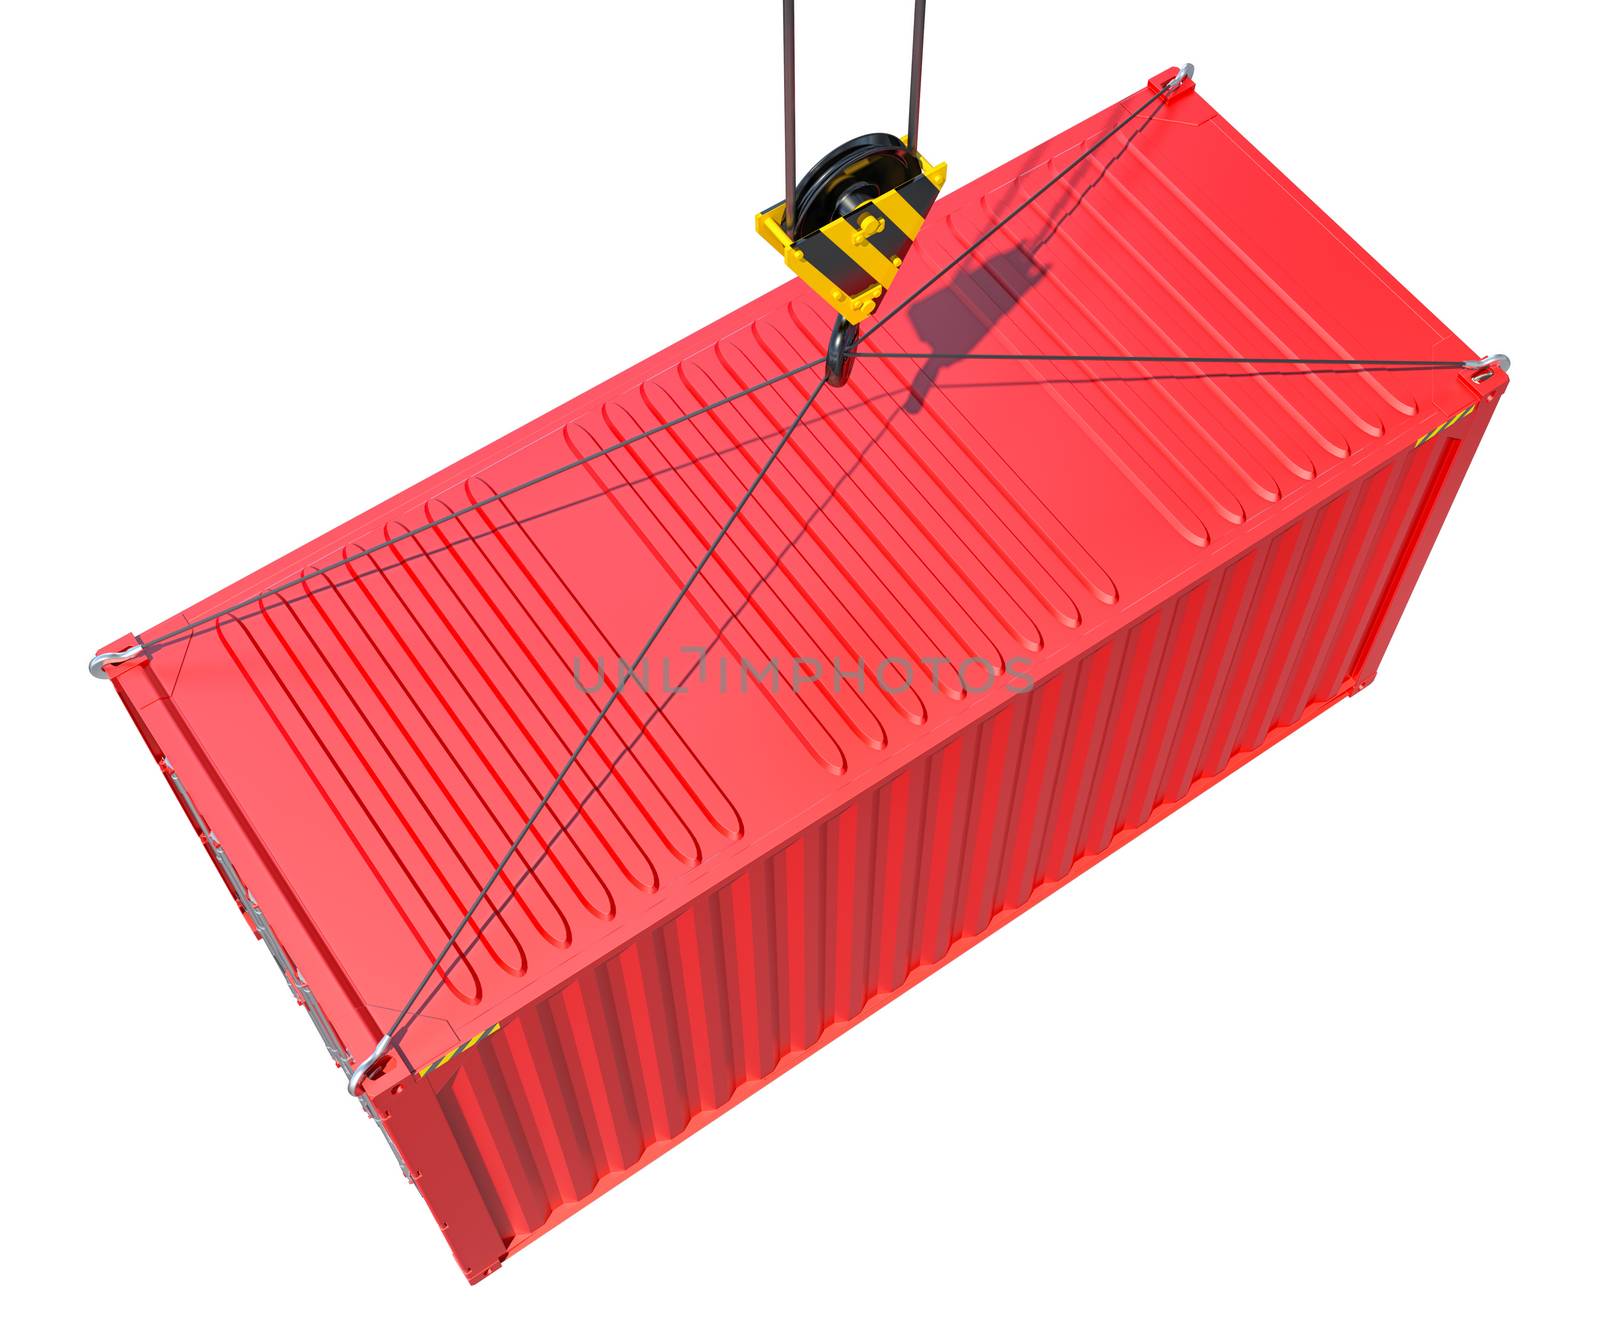 Shipping container during transport. Isolated on white. 3D rendering